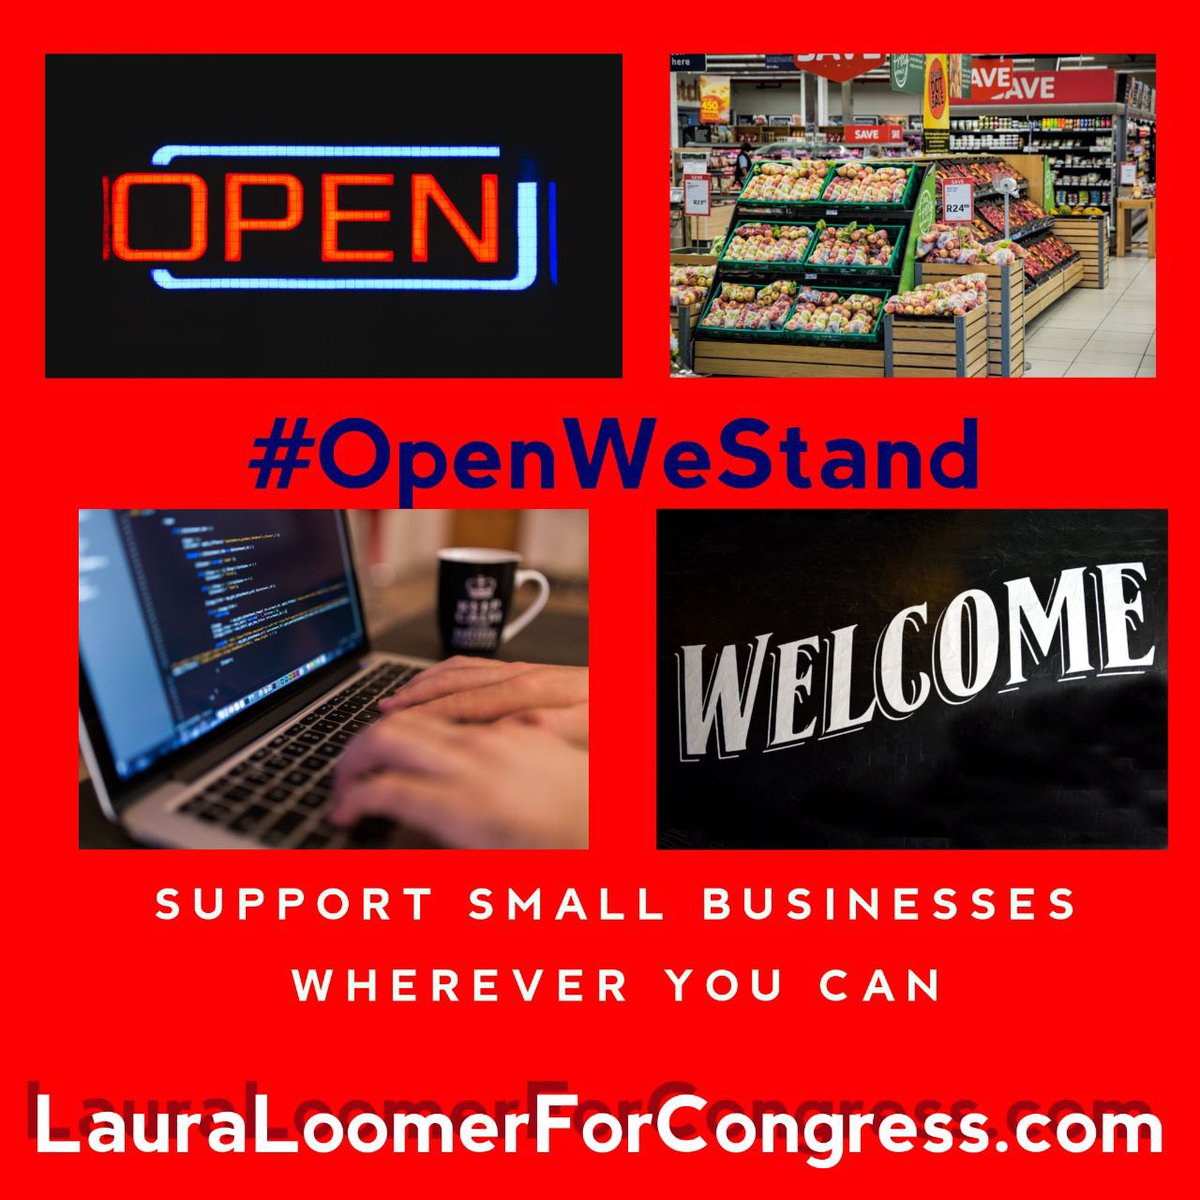 AmericaTogether #OpenWeStand #BailOut21 #District21 #LauraLoomer #LeadRight #Trump2020Landslide IF YOU ARE HAVING A DIFFICULT TIME WITH YOUR BuSINESS,ADD YOUR BUSINESS NAME IN tHE COMMENTS SECTION SO WE CAN PROMOTE YOU FOR THE DAY!